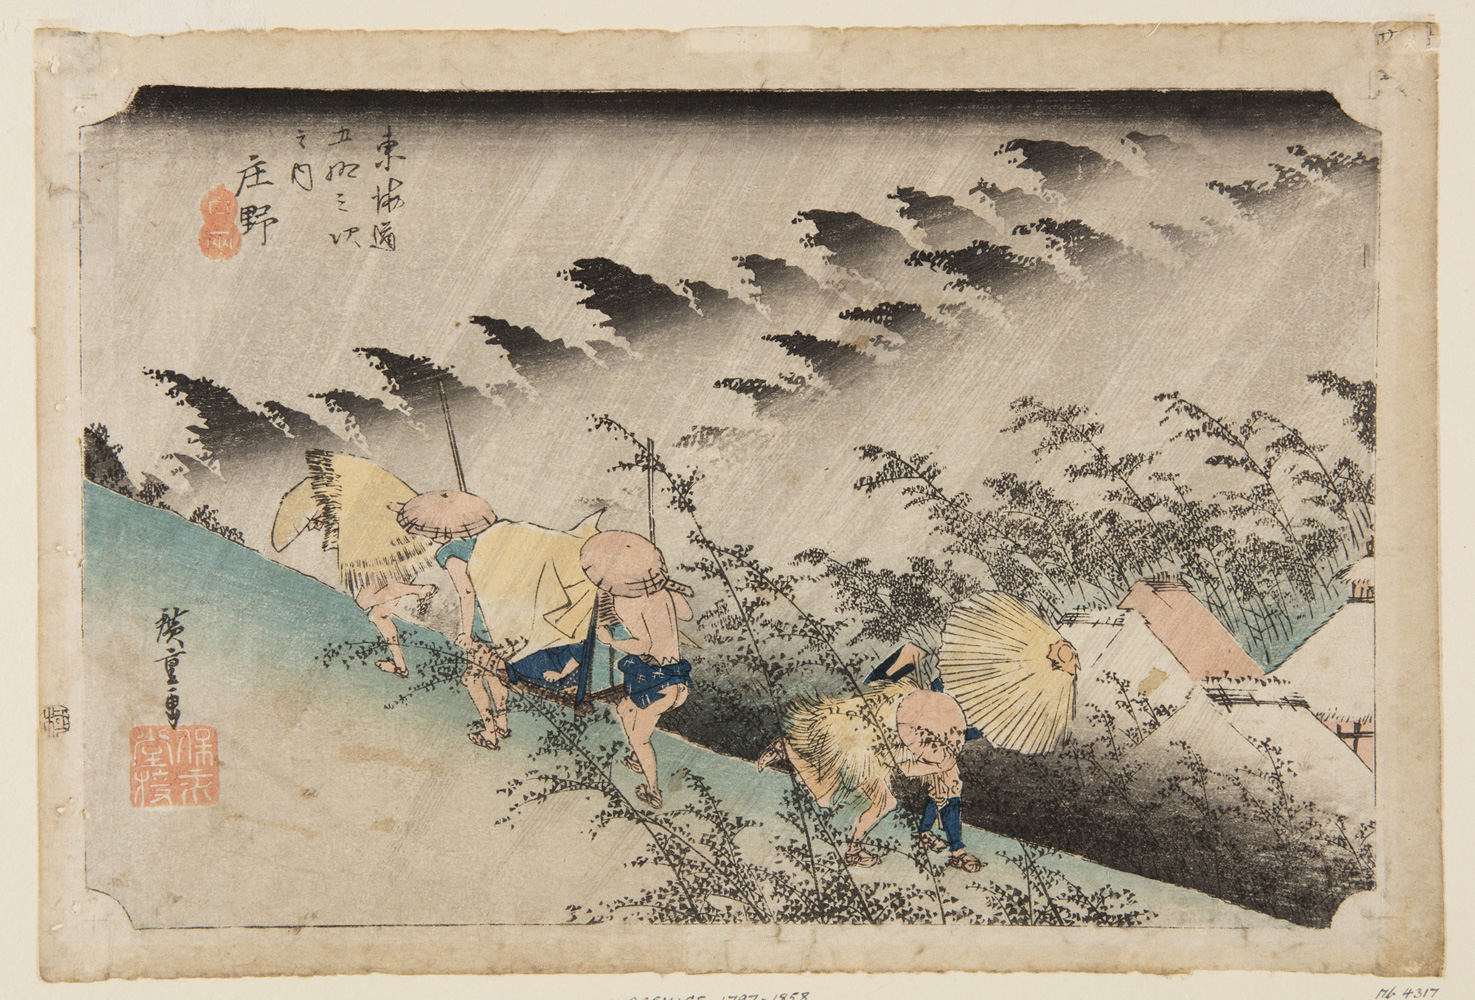 Japanese print. Travelers walk along a hillside dressed in traditional clothes. Two carry a passenger on a chair. They are bent against the weather and the rain slants across the scene top right to bottom left.